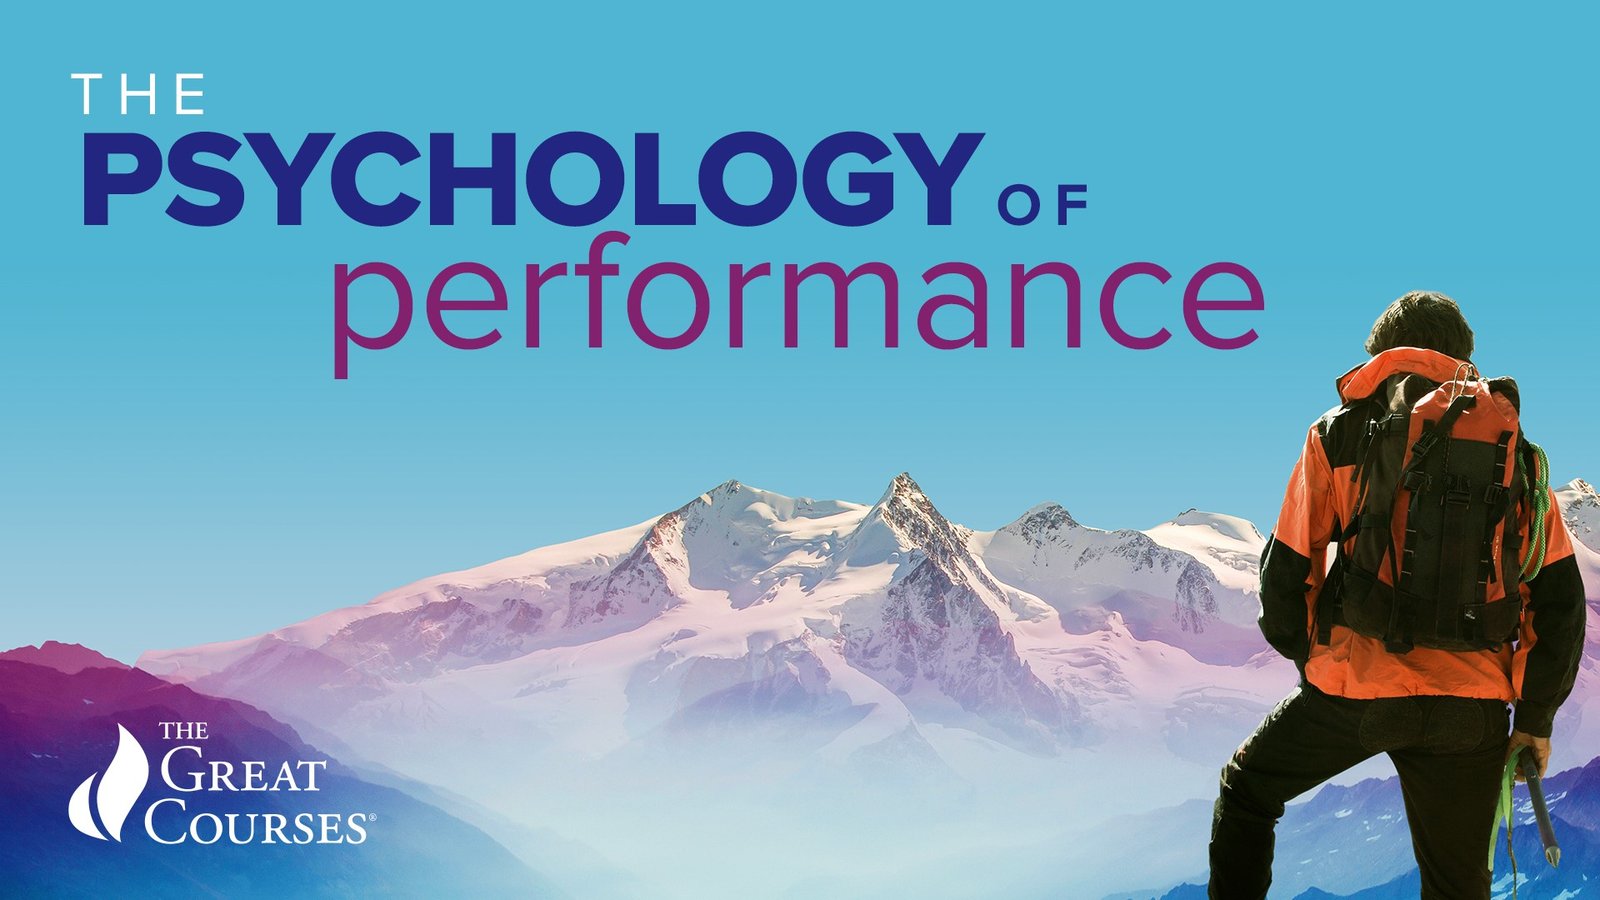 The Psychology of Performance - How to Be Your Best in Life